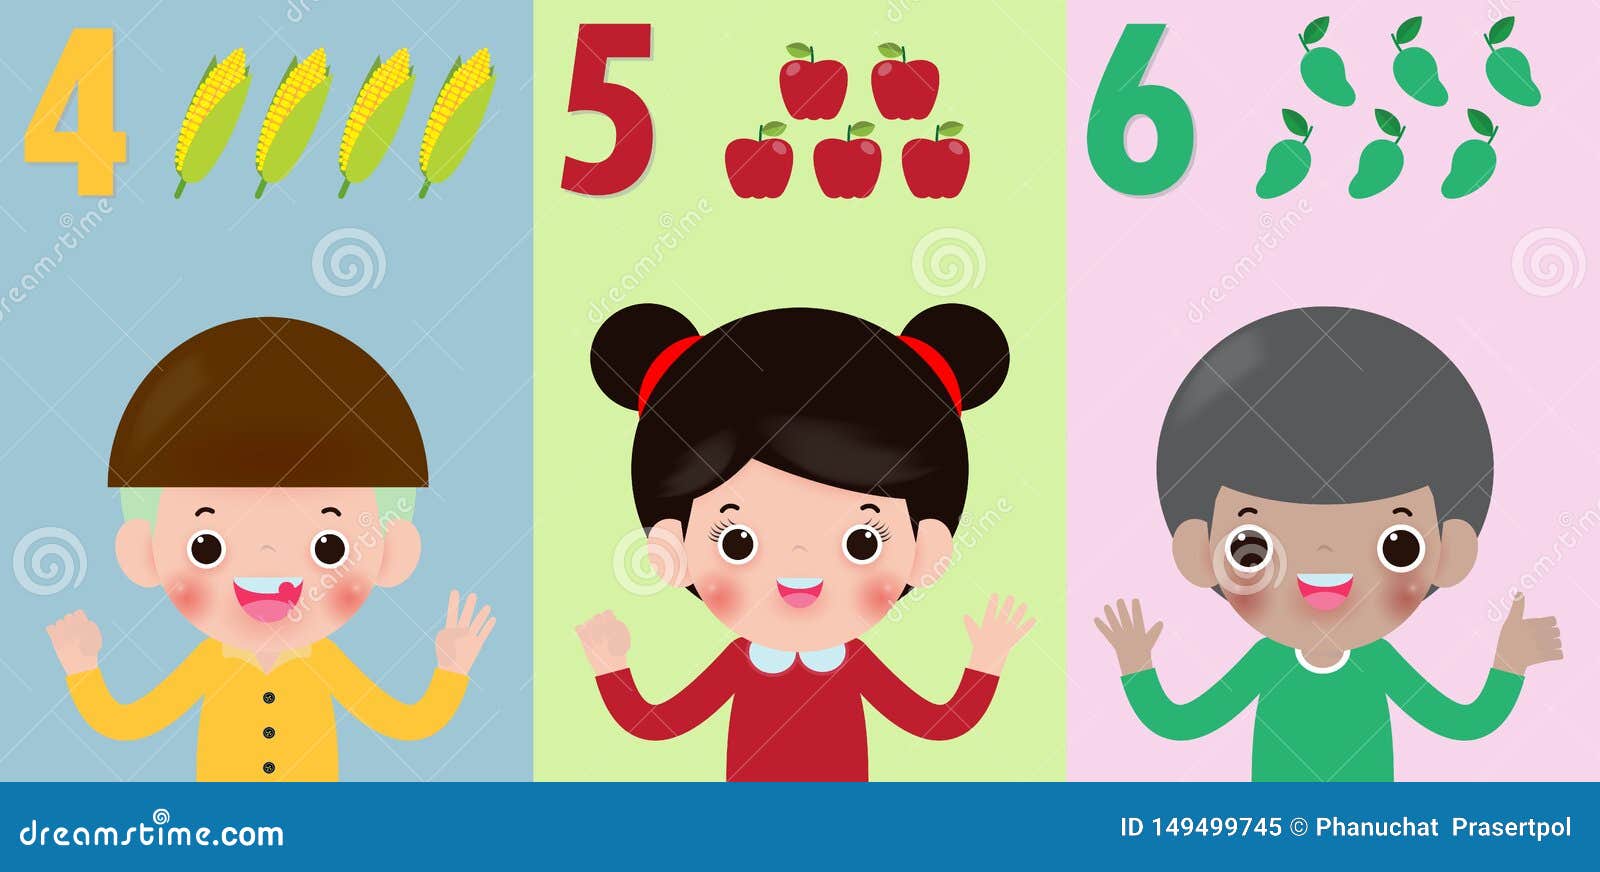 children-hand-showing-the-number-four-five-six-kids-showing-numbers-4-5-6-by-fingers